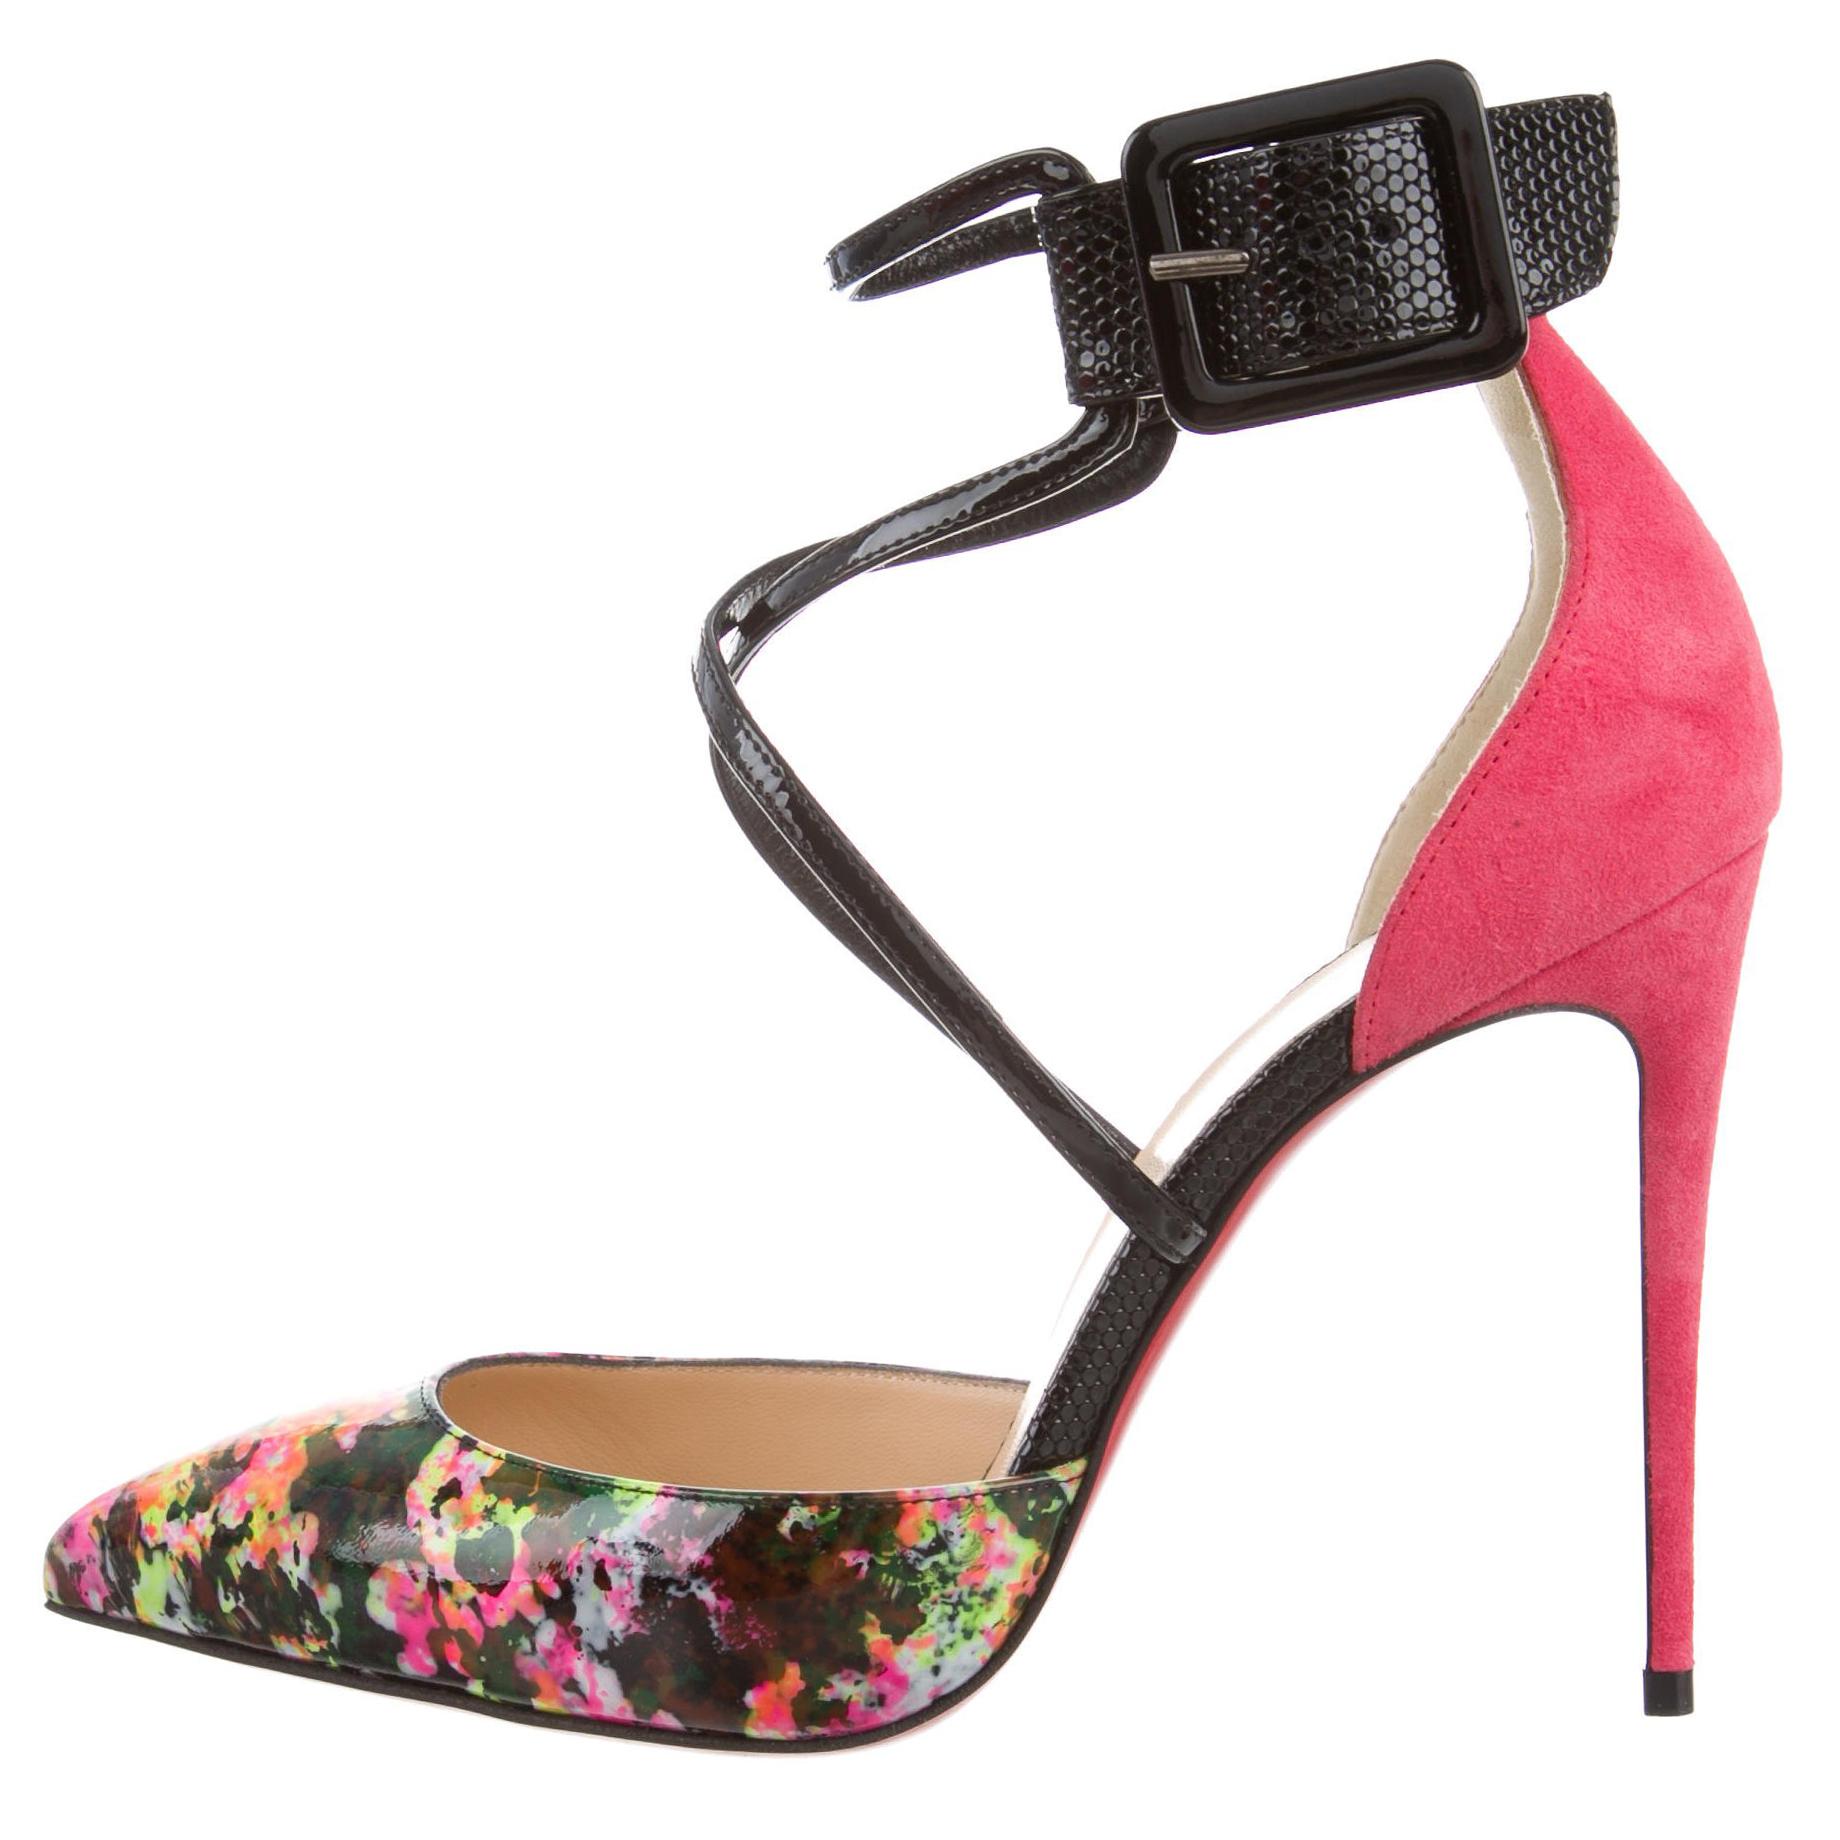 Christian Louboutin NEW Pink Suede Patent Floral Pointy Evening Pumps Heels 